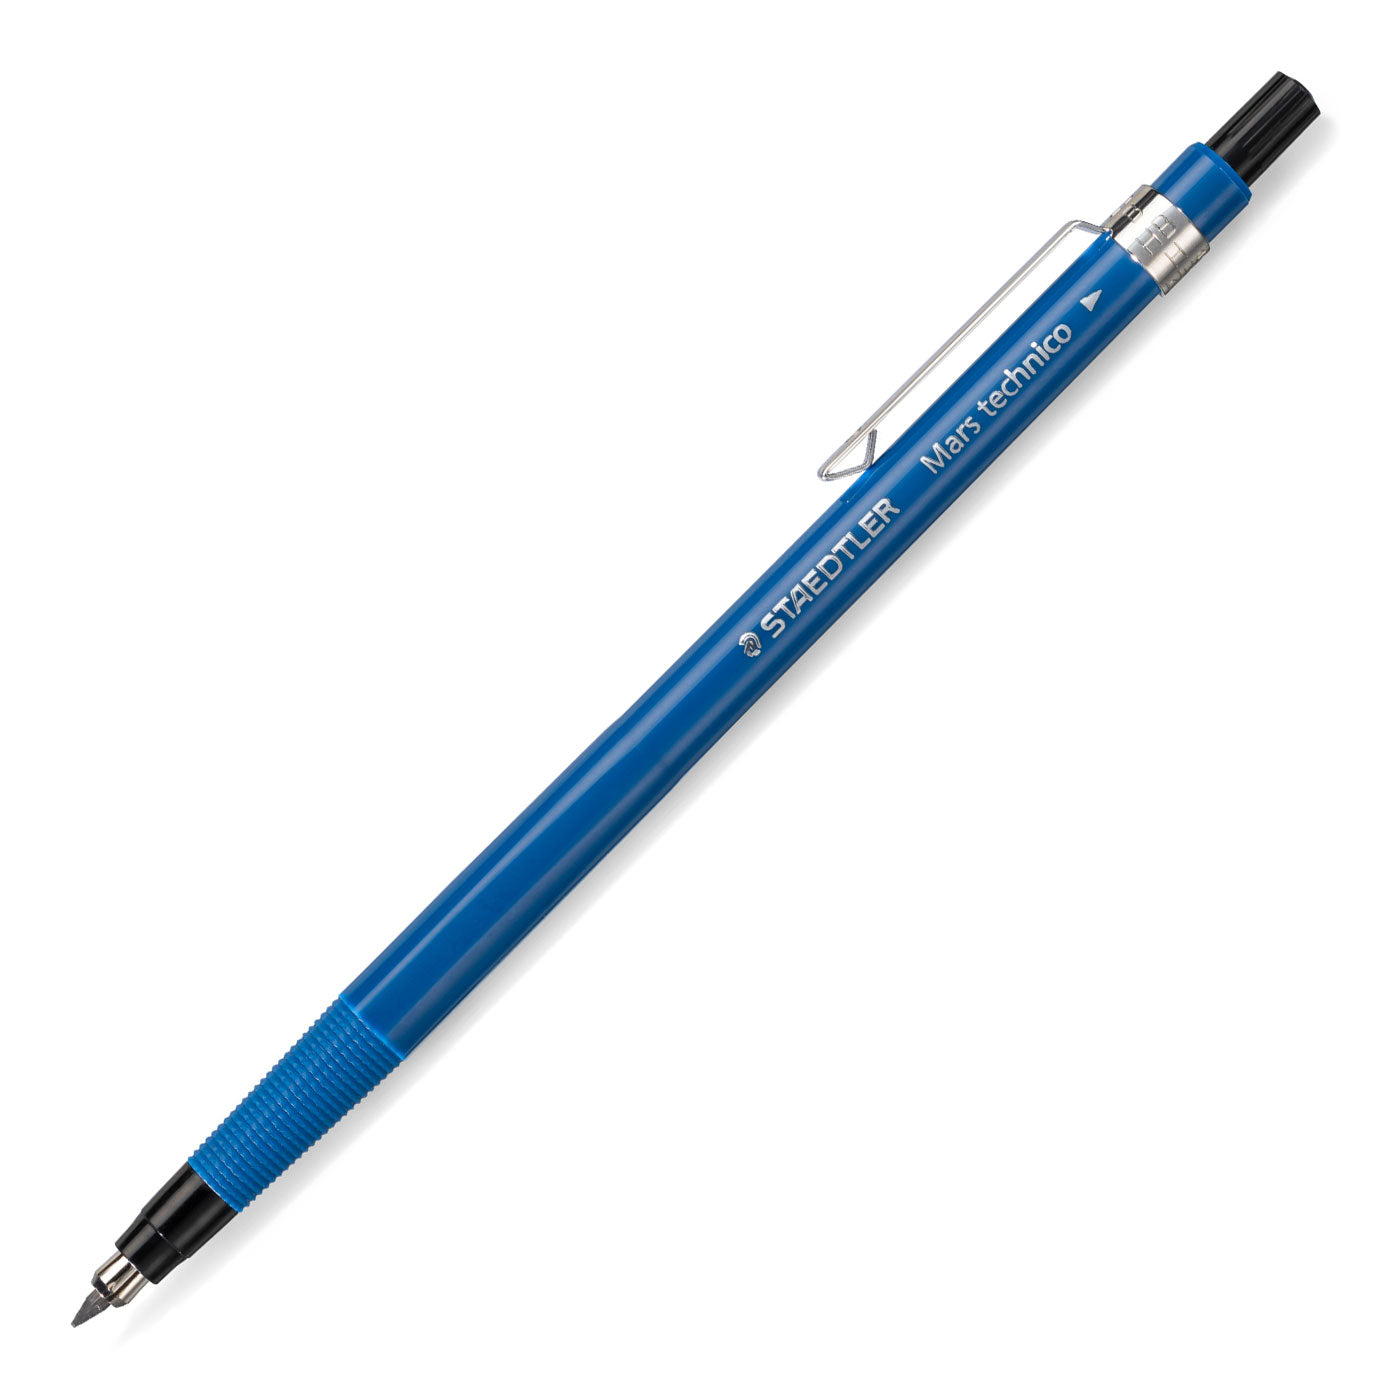 Staedtler Clutch Pencil 788 C Mars Technico 2mm with HB Lead